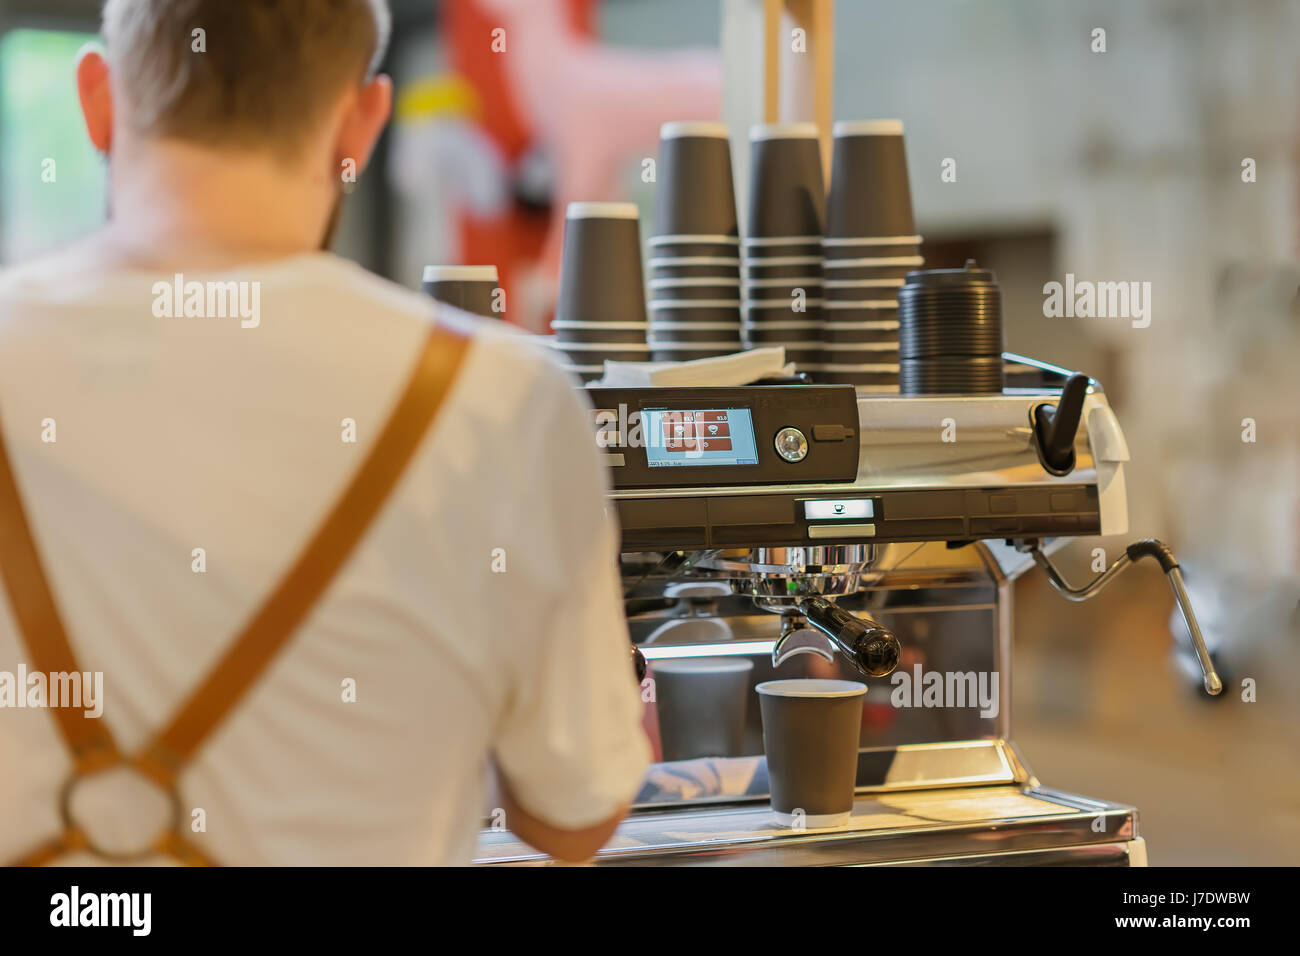 Professional barista preparing coffee in the coffee machine. View from the back. Fresh espresso. Coffee culture, professional making, service and catering concepts Stock Photo